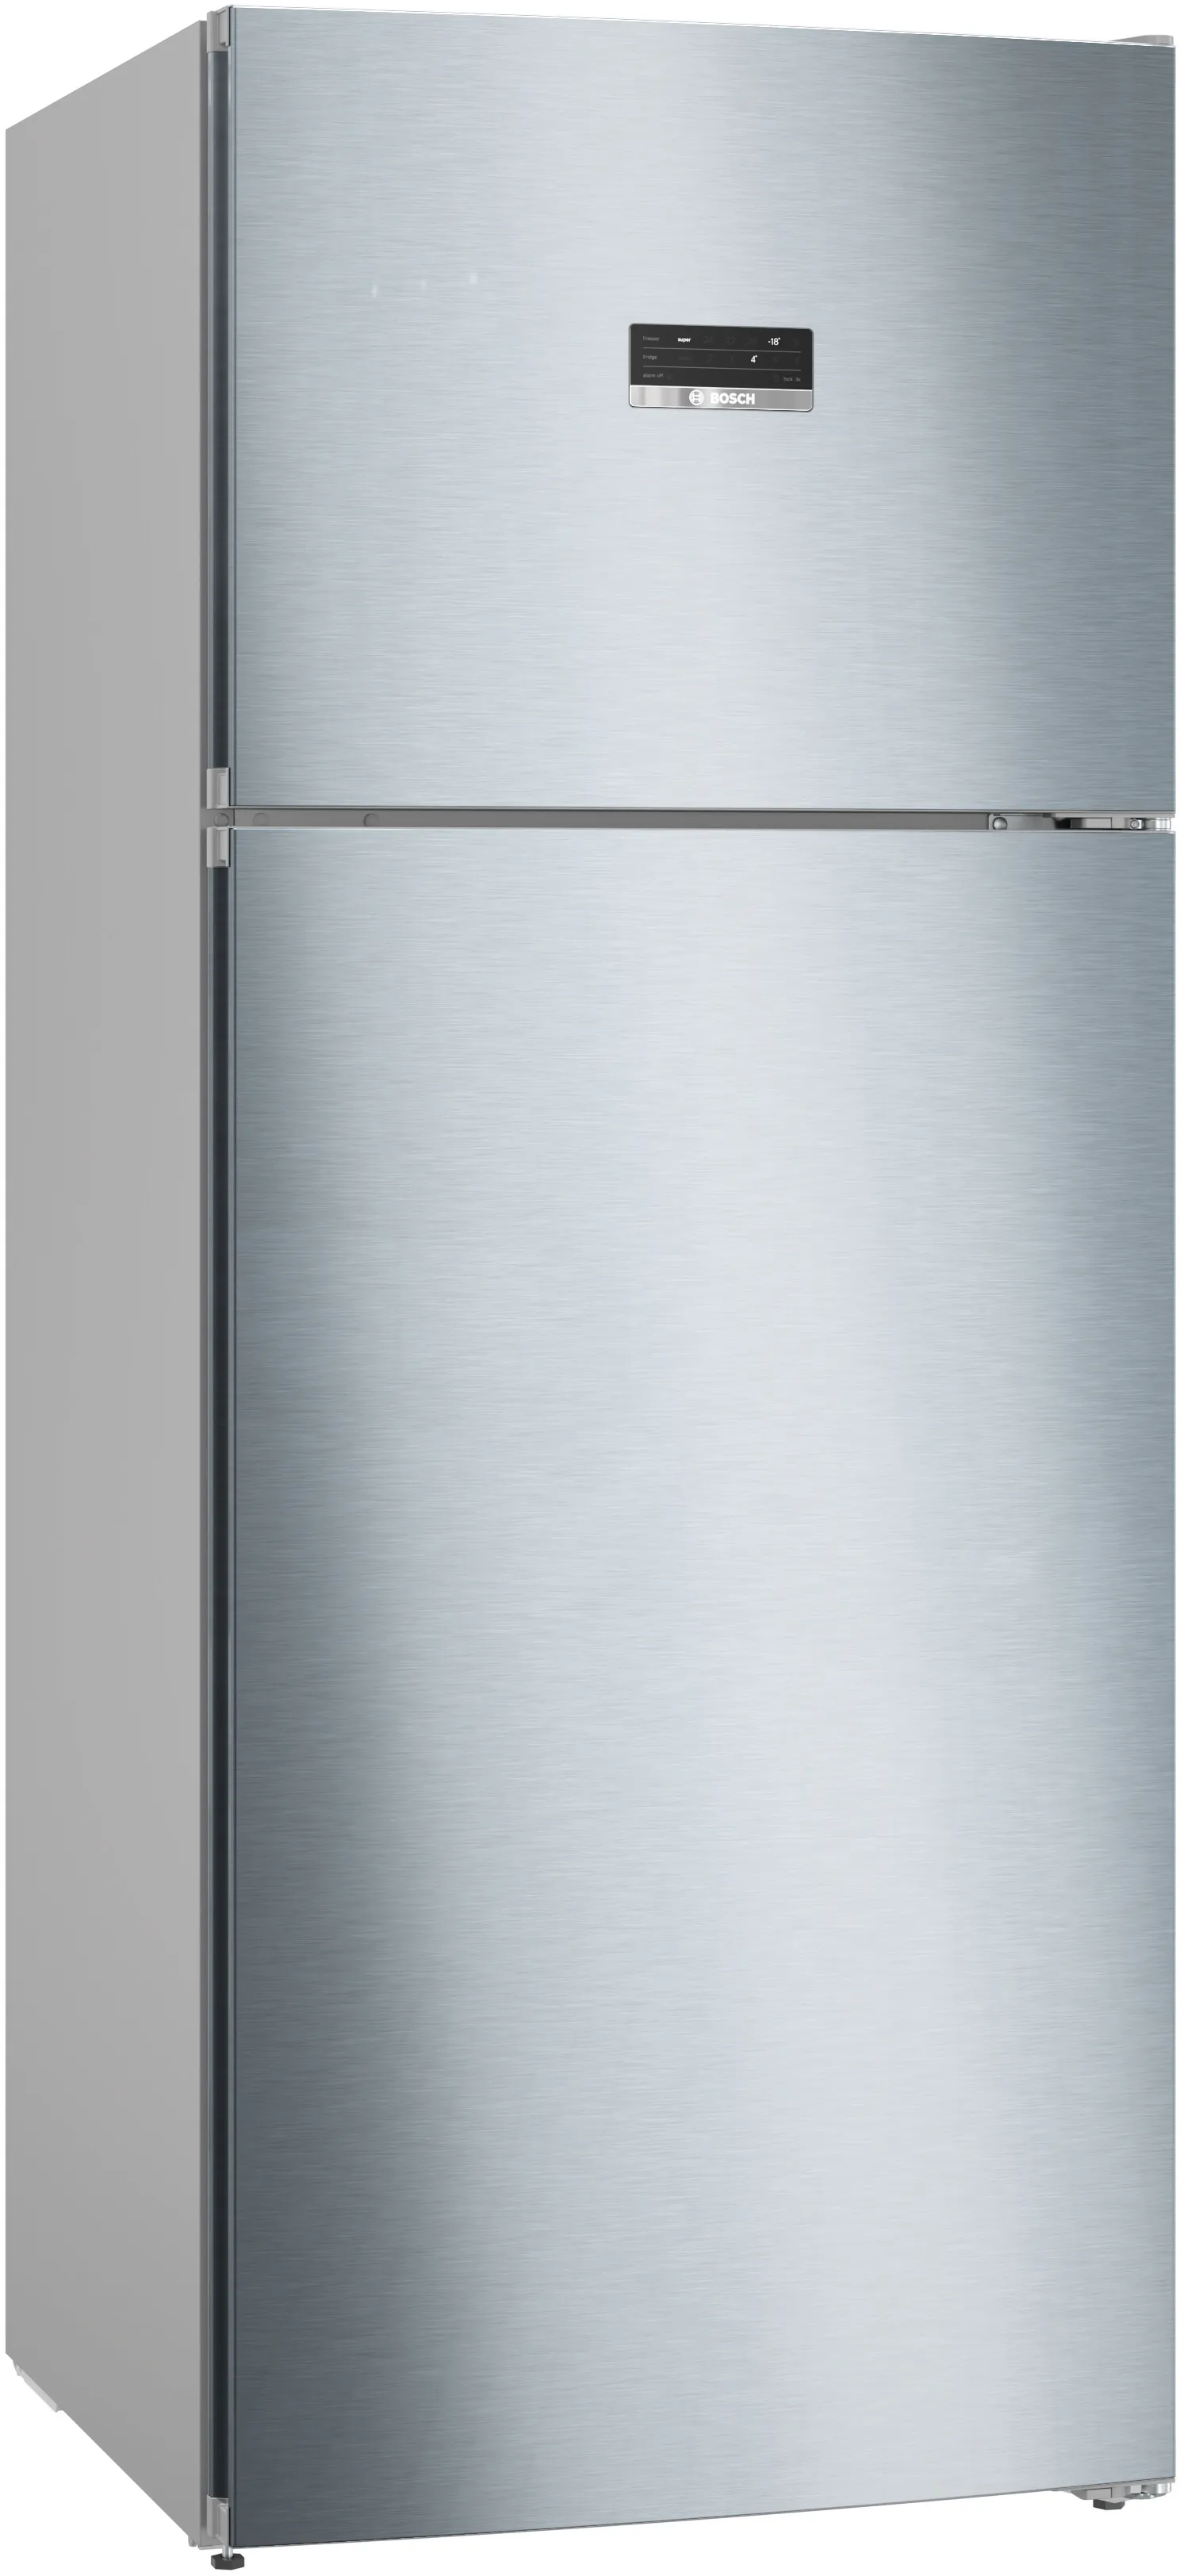 Series 4 free-standing fridge-freezer with freezer at top 186 x 75 cm Stainless steel (with anti-fingerprint) 